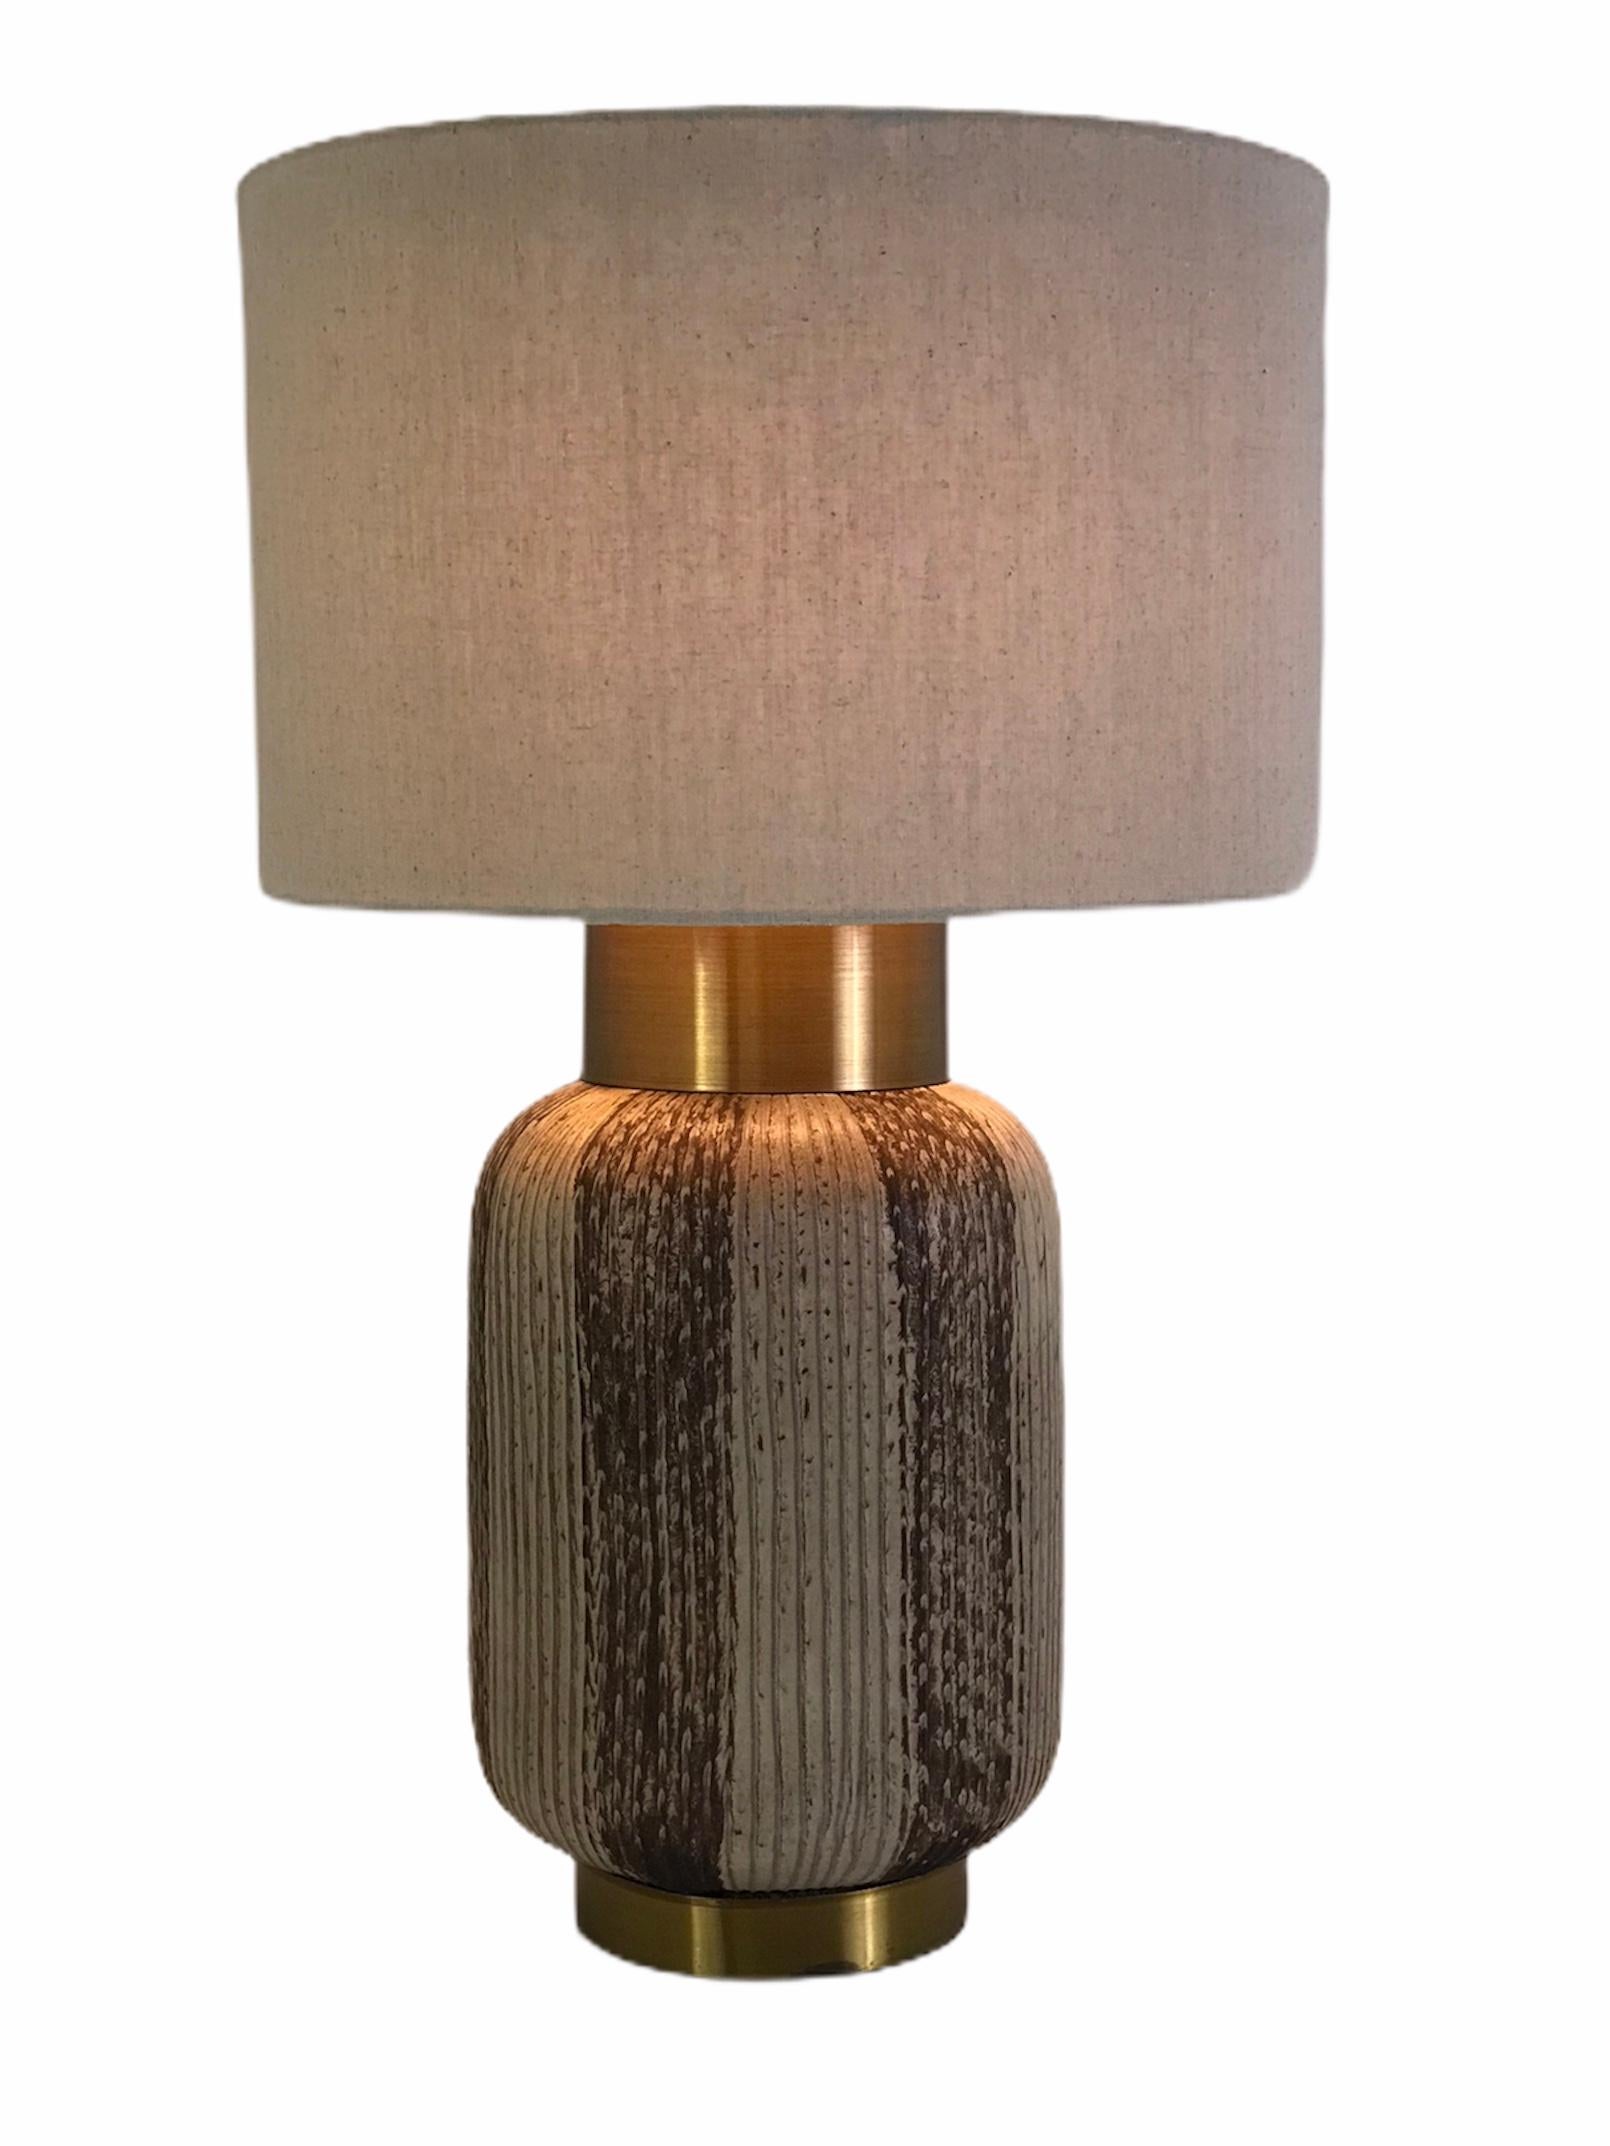 Mid-20th Century 1950s Conover Style Pottery and Brass Table Lamp